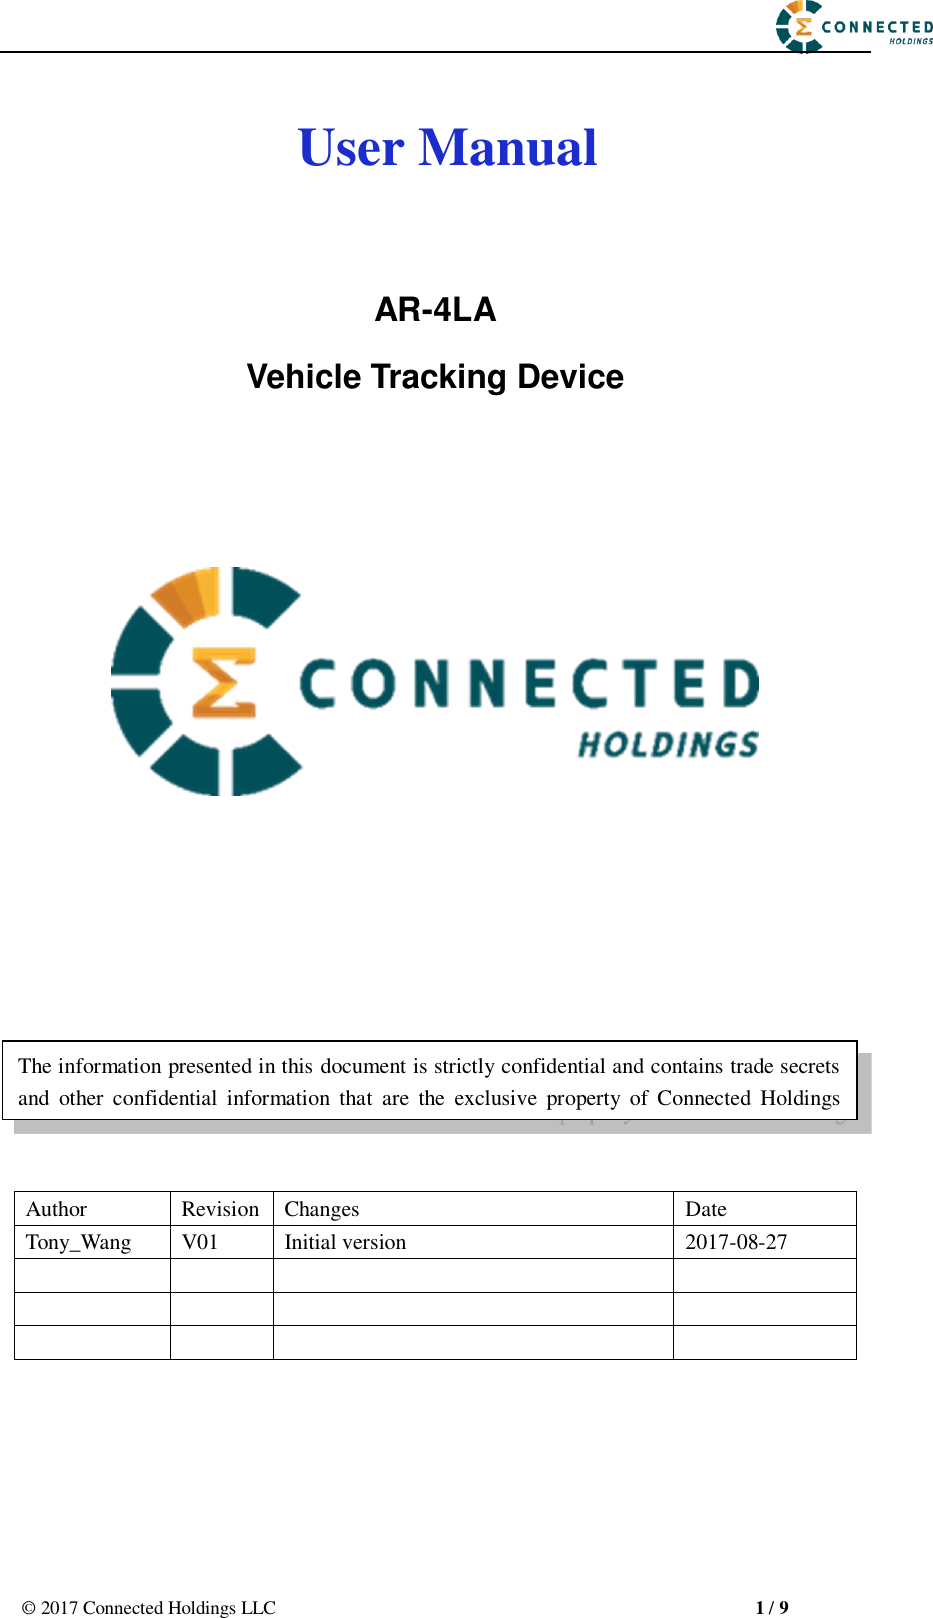                                                       ©  2017 Connected Holdings LLC                                                       1 / 9    User Manual   AR-4LA Vehicle Tracking Device                  Author Revision Changes Date Tony_Wang V01 Initial version 2017-08-27             The information presented in this document is strictly confidential and contains trade secrets and  other  confidential  information  that  are  the  exclusive  property  of  Connected  Holdings 